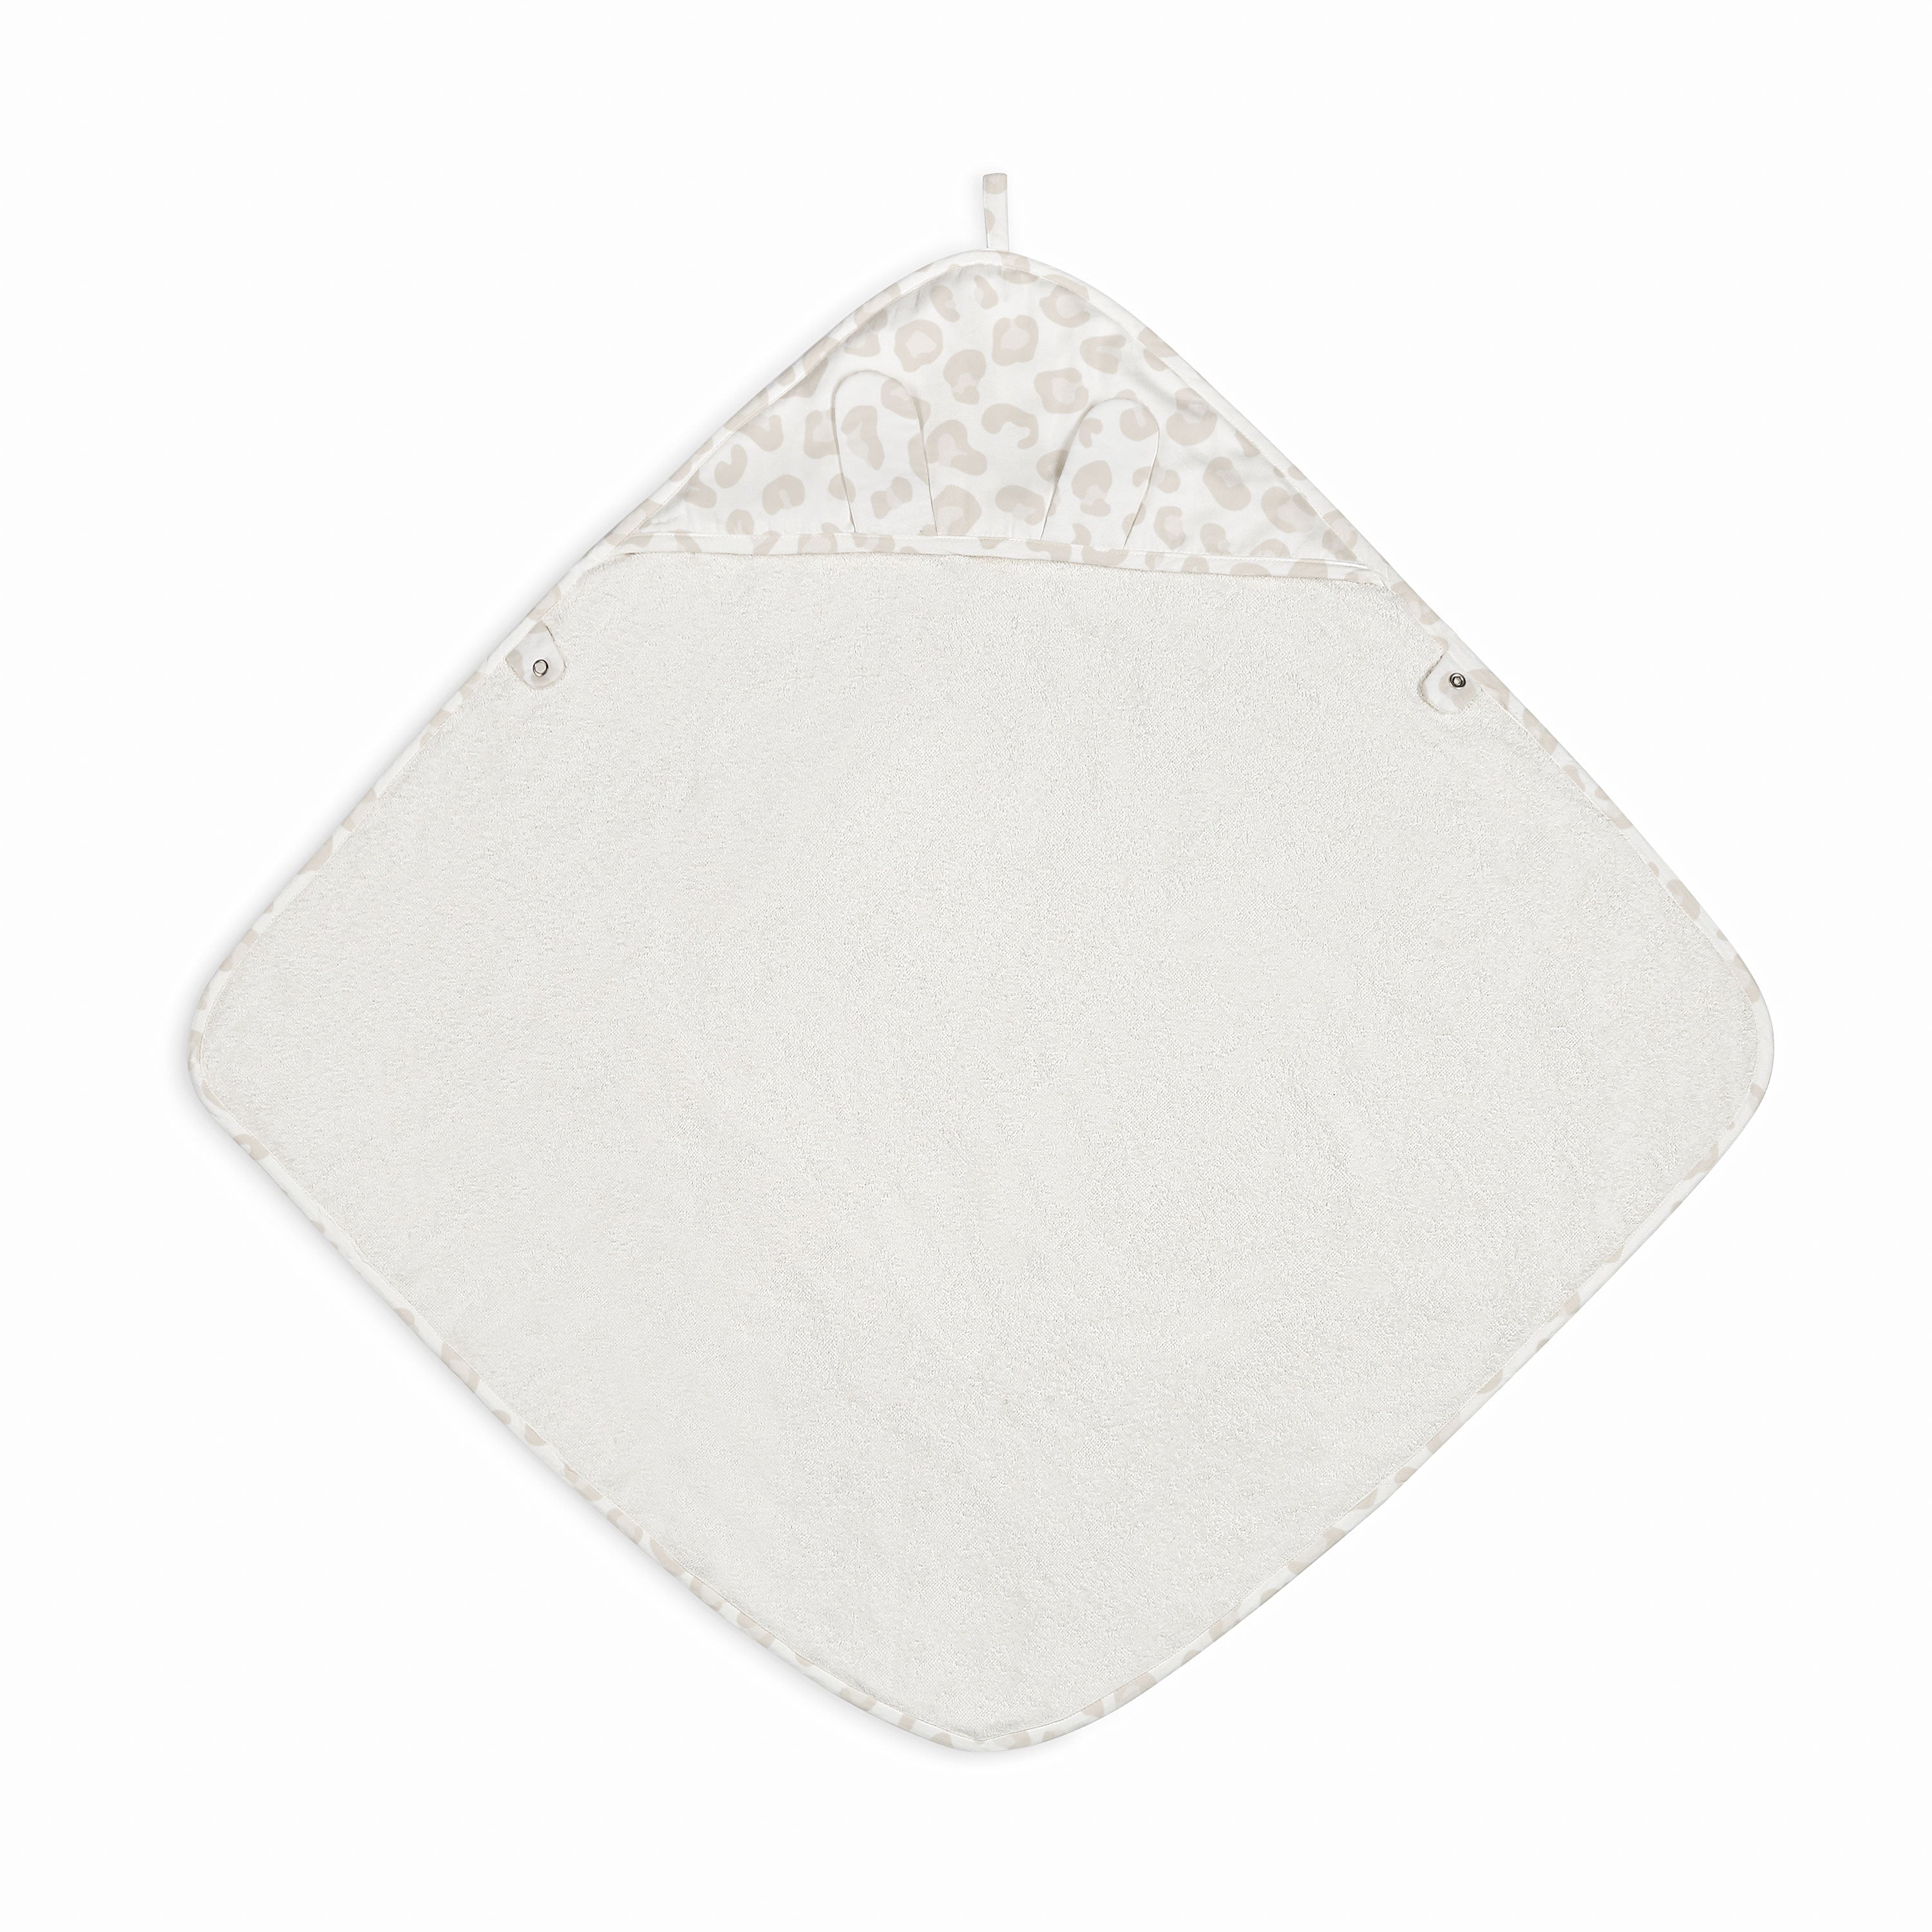 Organic Cotton Hooded Baby Towel & Poncho - Wild